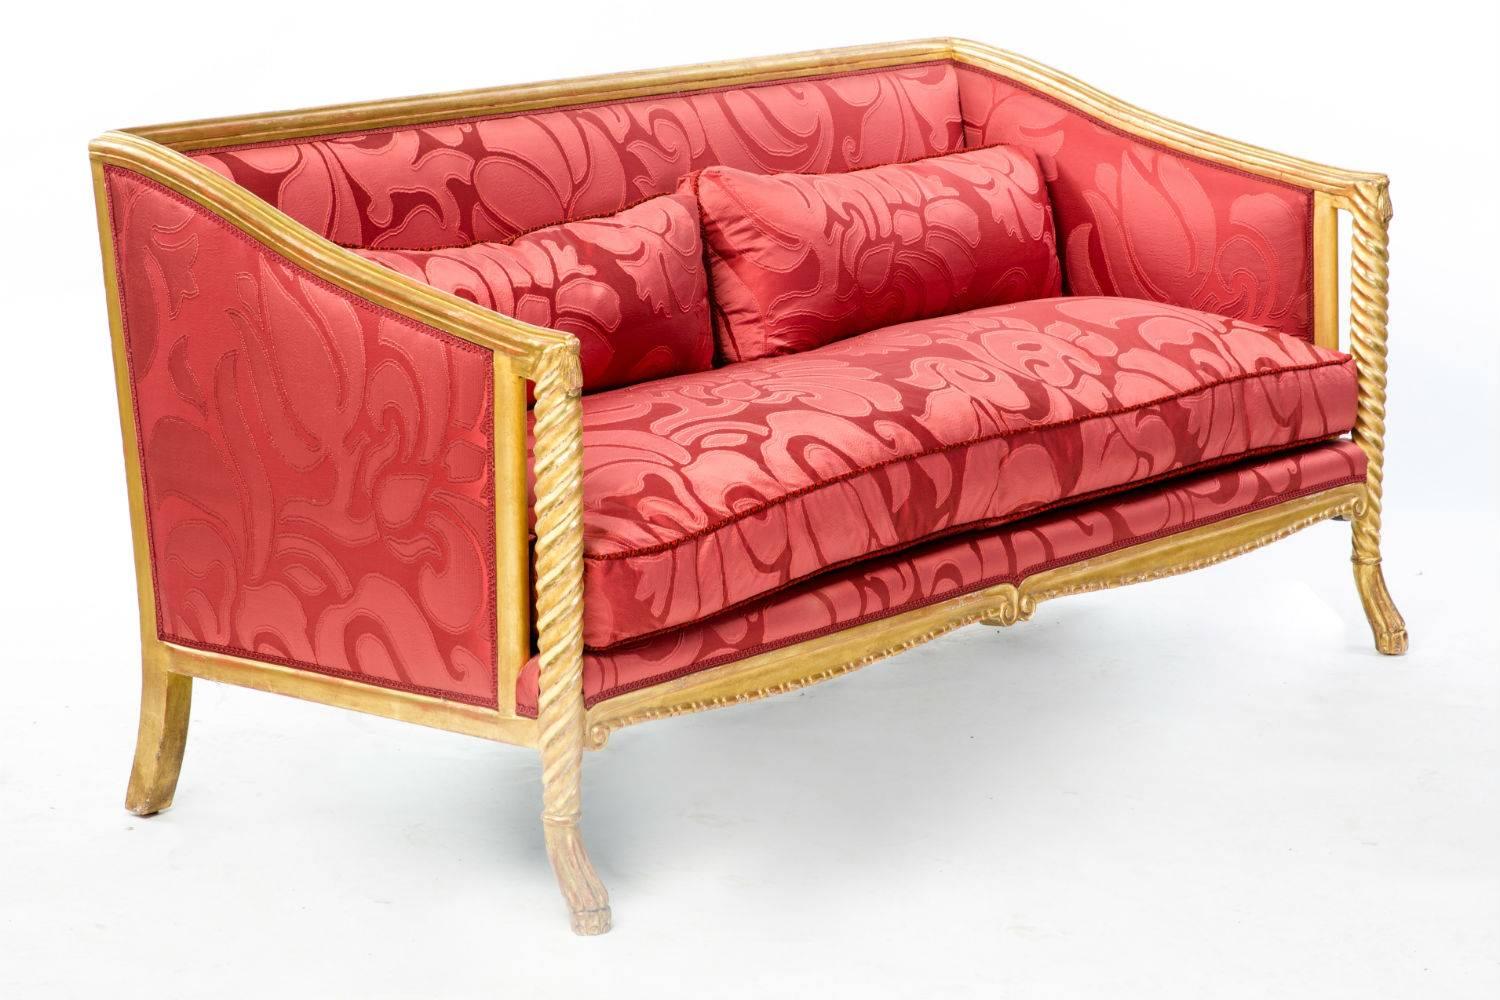 This is a stunning carved frame Medici sofa upholstered in Abbondio fabric by Bergamo, finished with premium trim and 23-karat gold finish on the alder wood frame.